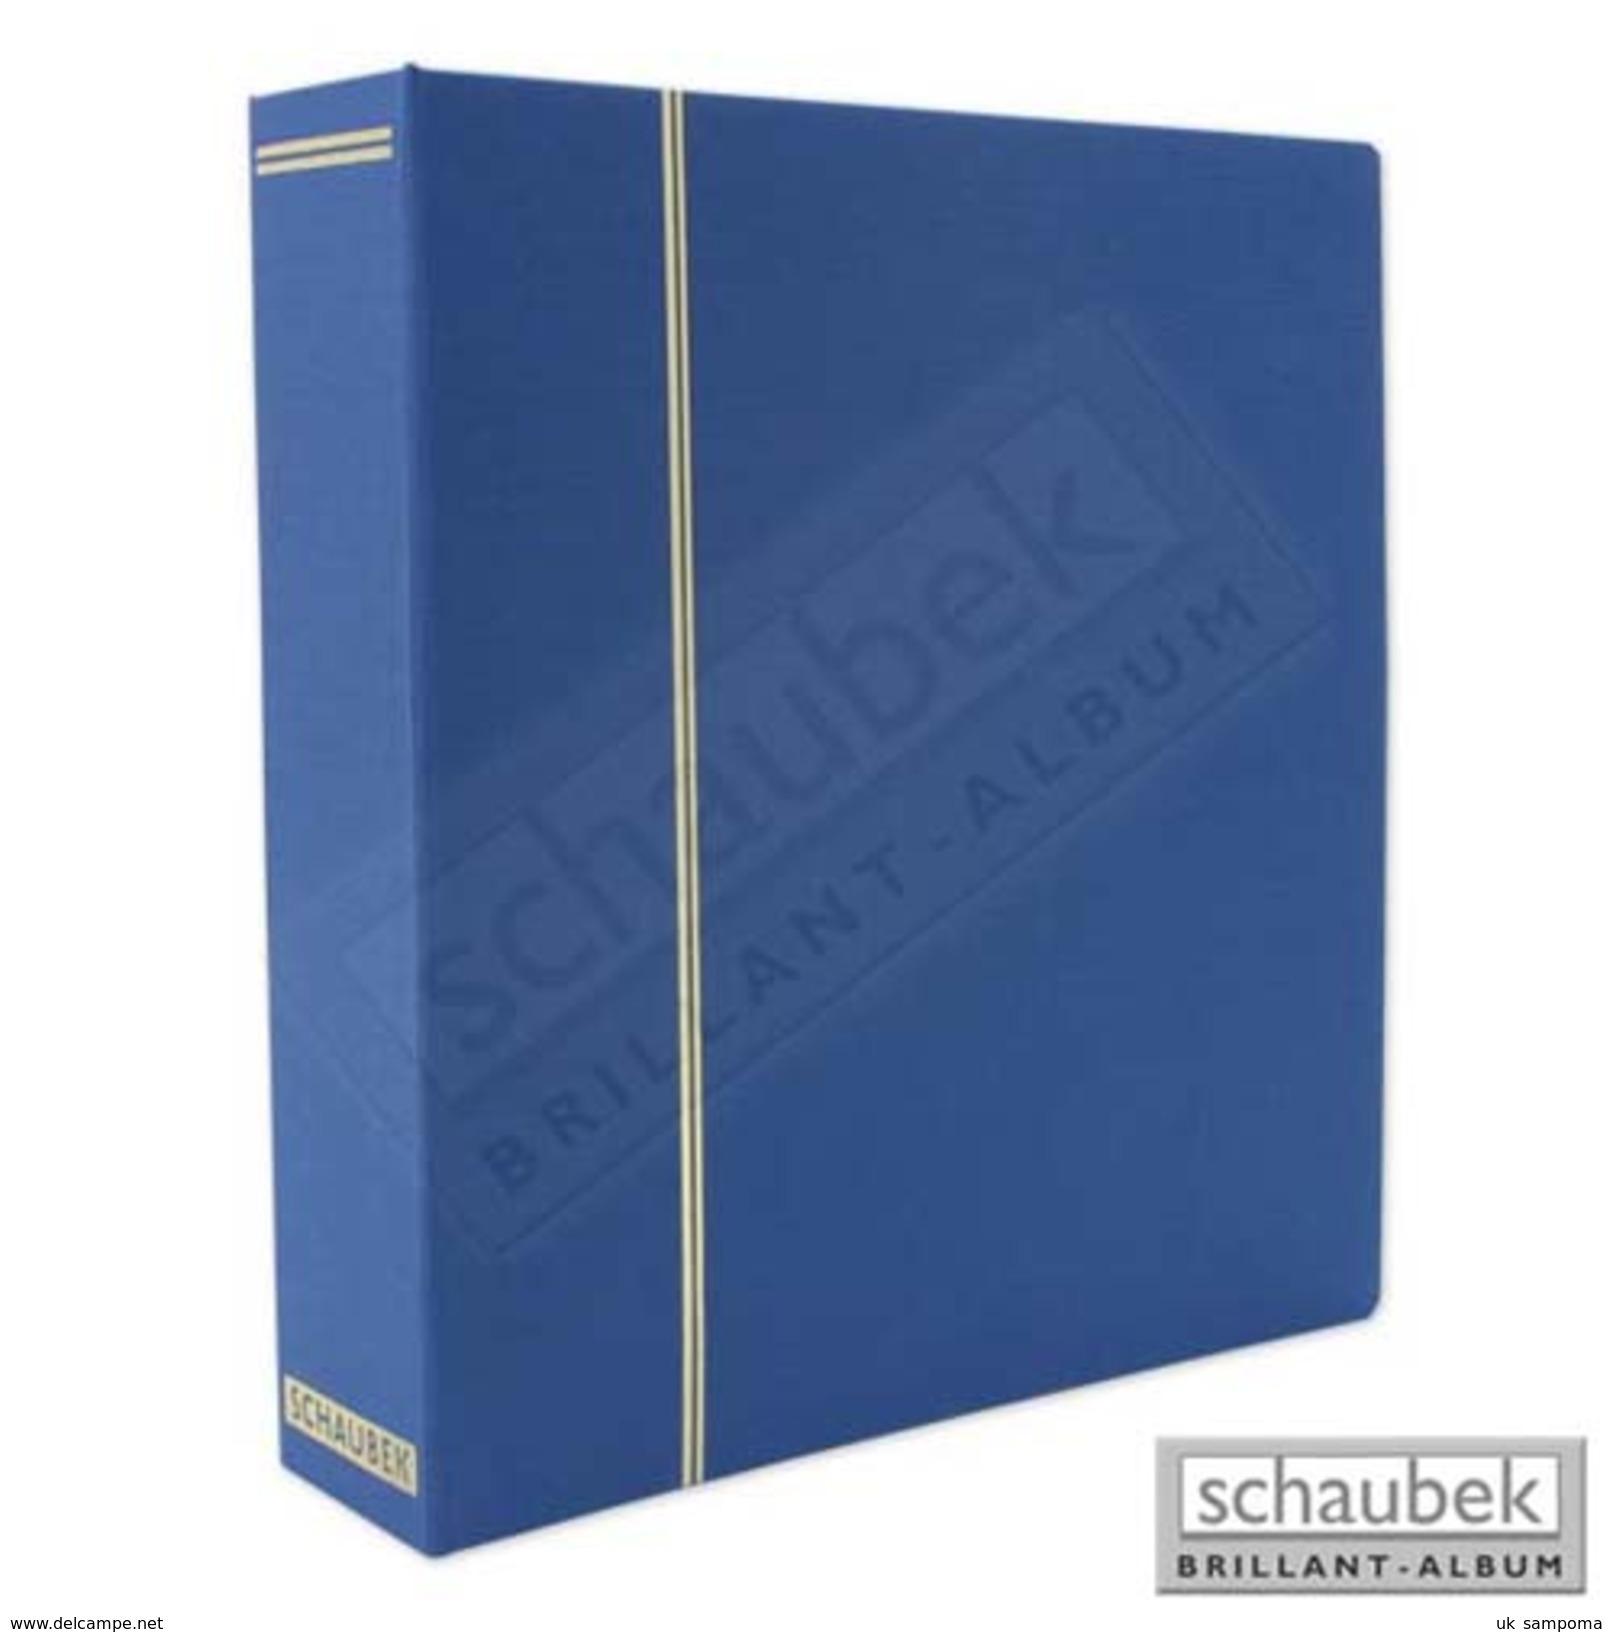 Schaubek DSKT Cloth Screw Post Binder, Blue, In A Incl. 20 Headed Country Sheets Of Your Choice - Binders Only